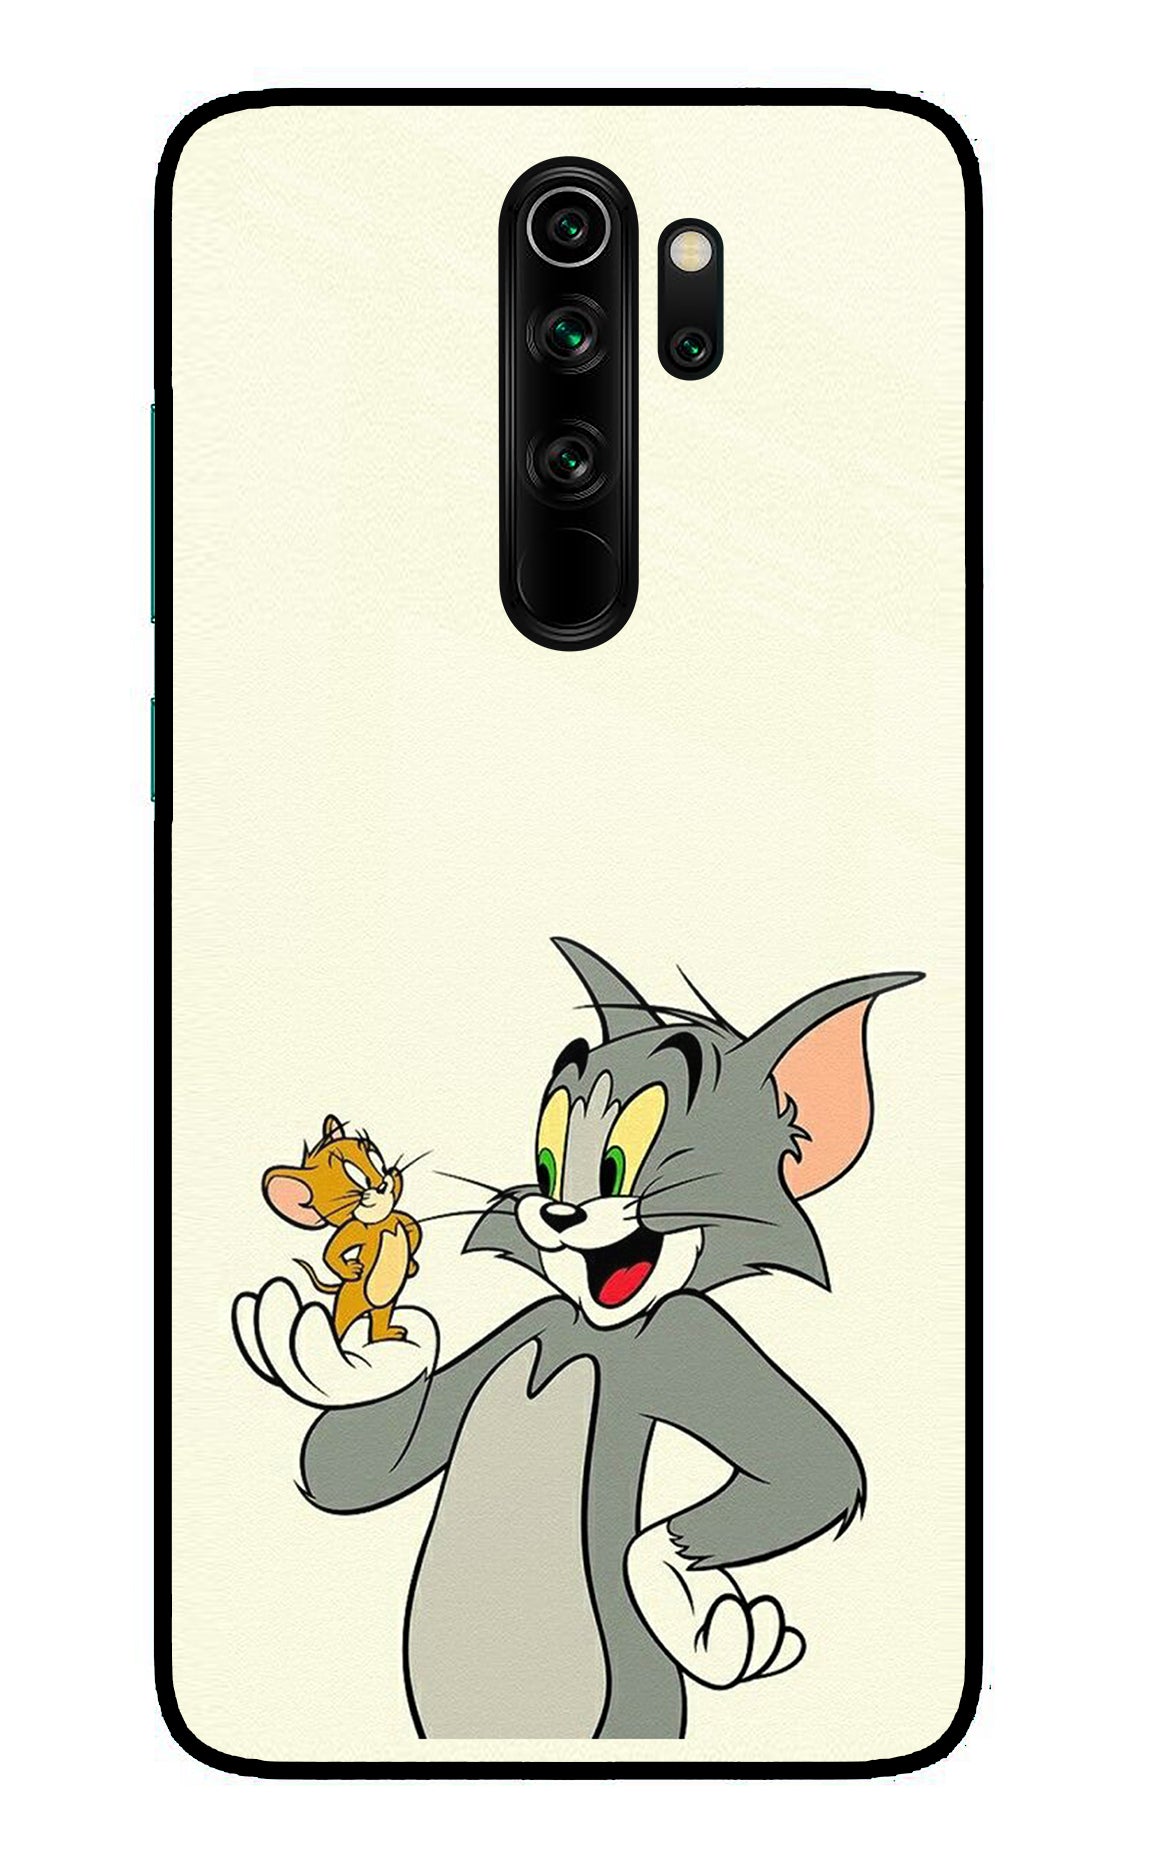 Tom & Jerry Redmi Note 8 Pro Back Cover